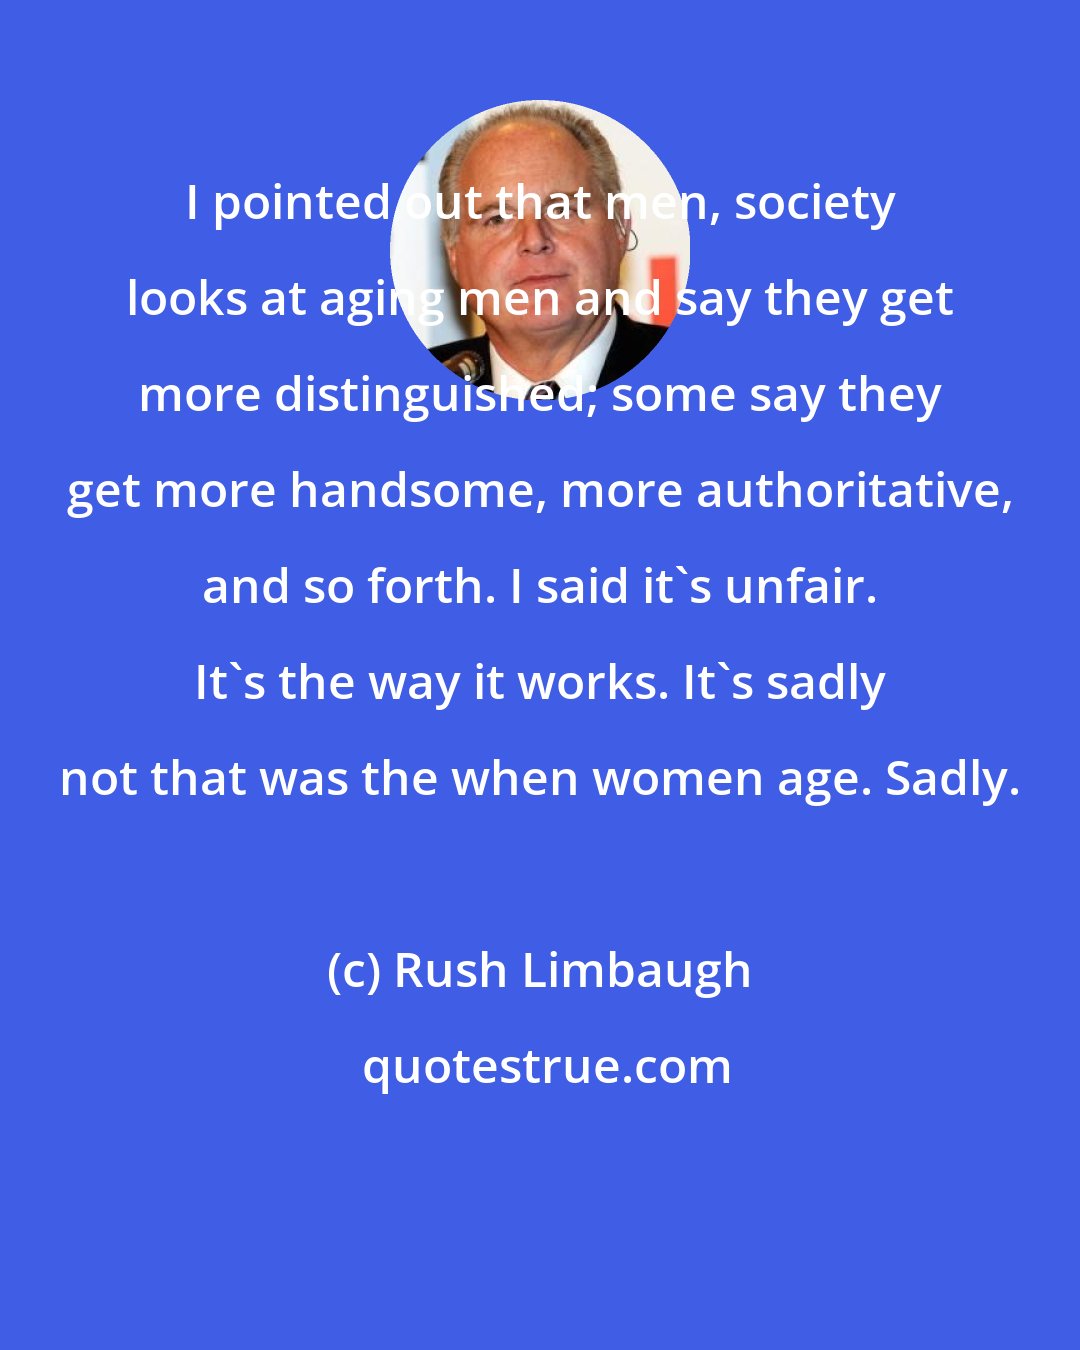 Rush Limbaugh: I pointed out that men, society looks at aging men and say they get more distinguished; some say they get more handsome, more authoritative, and so forth. I said it's unfair. It's the way it works. It's sadly not that was the when women age. Sadly.